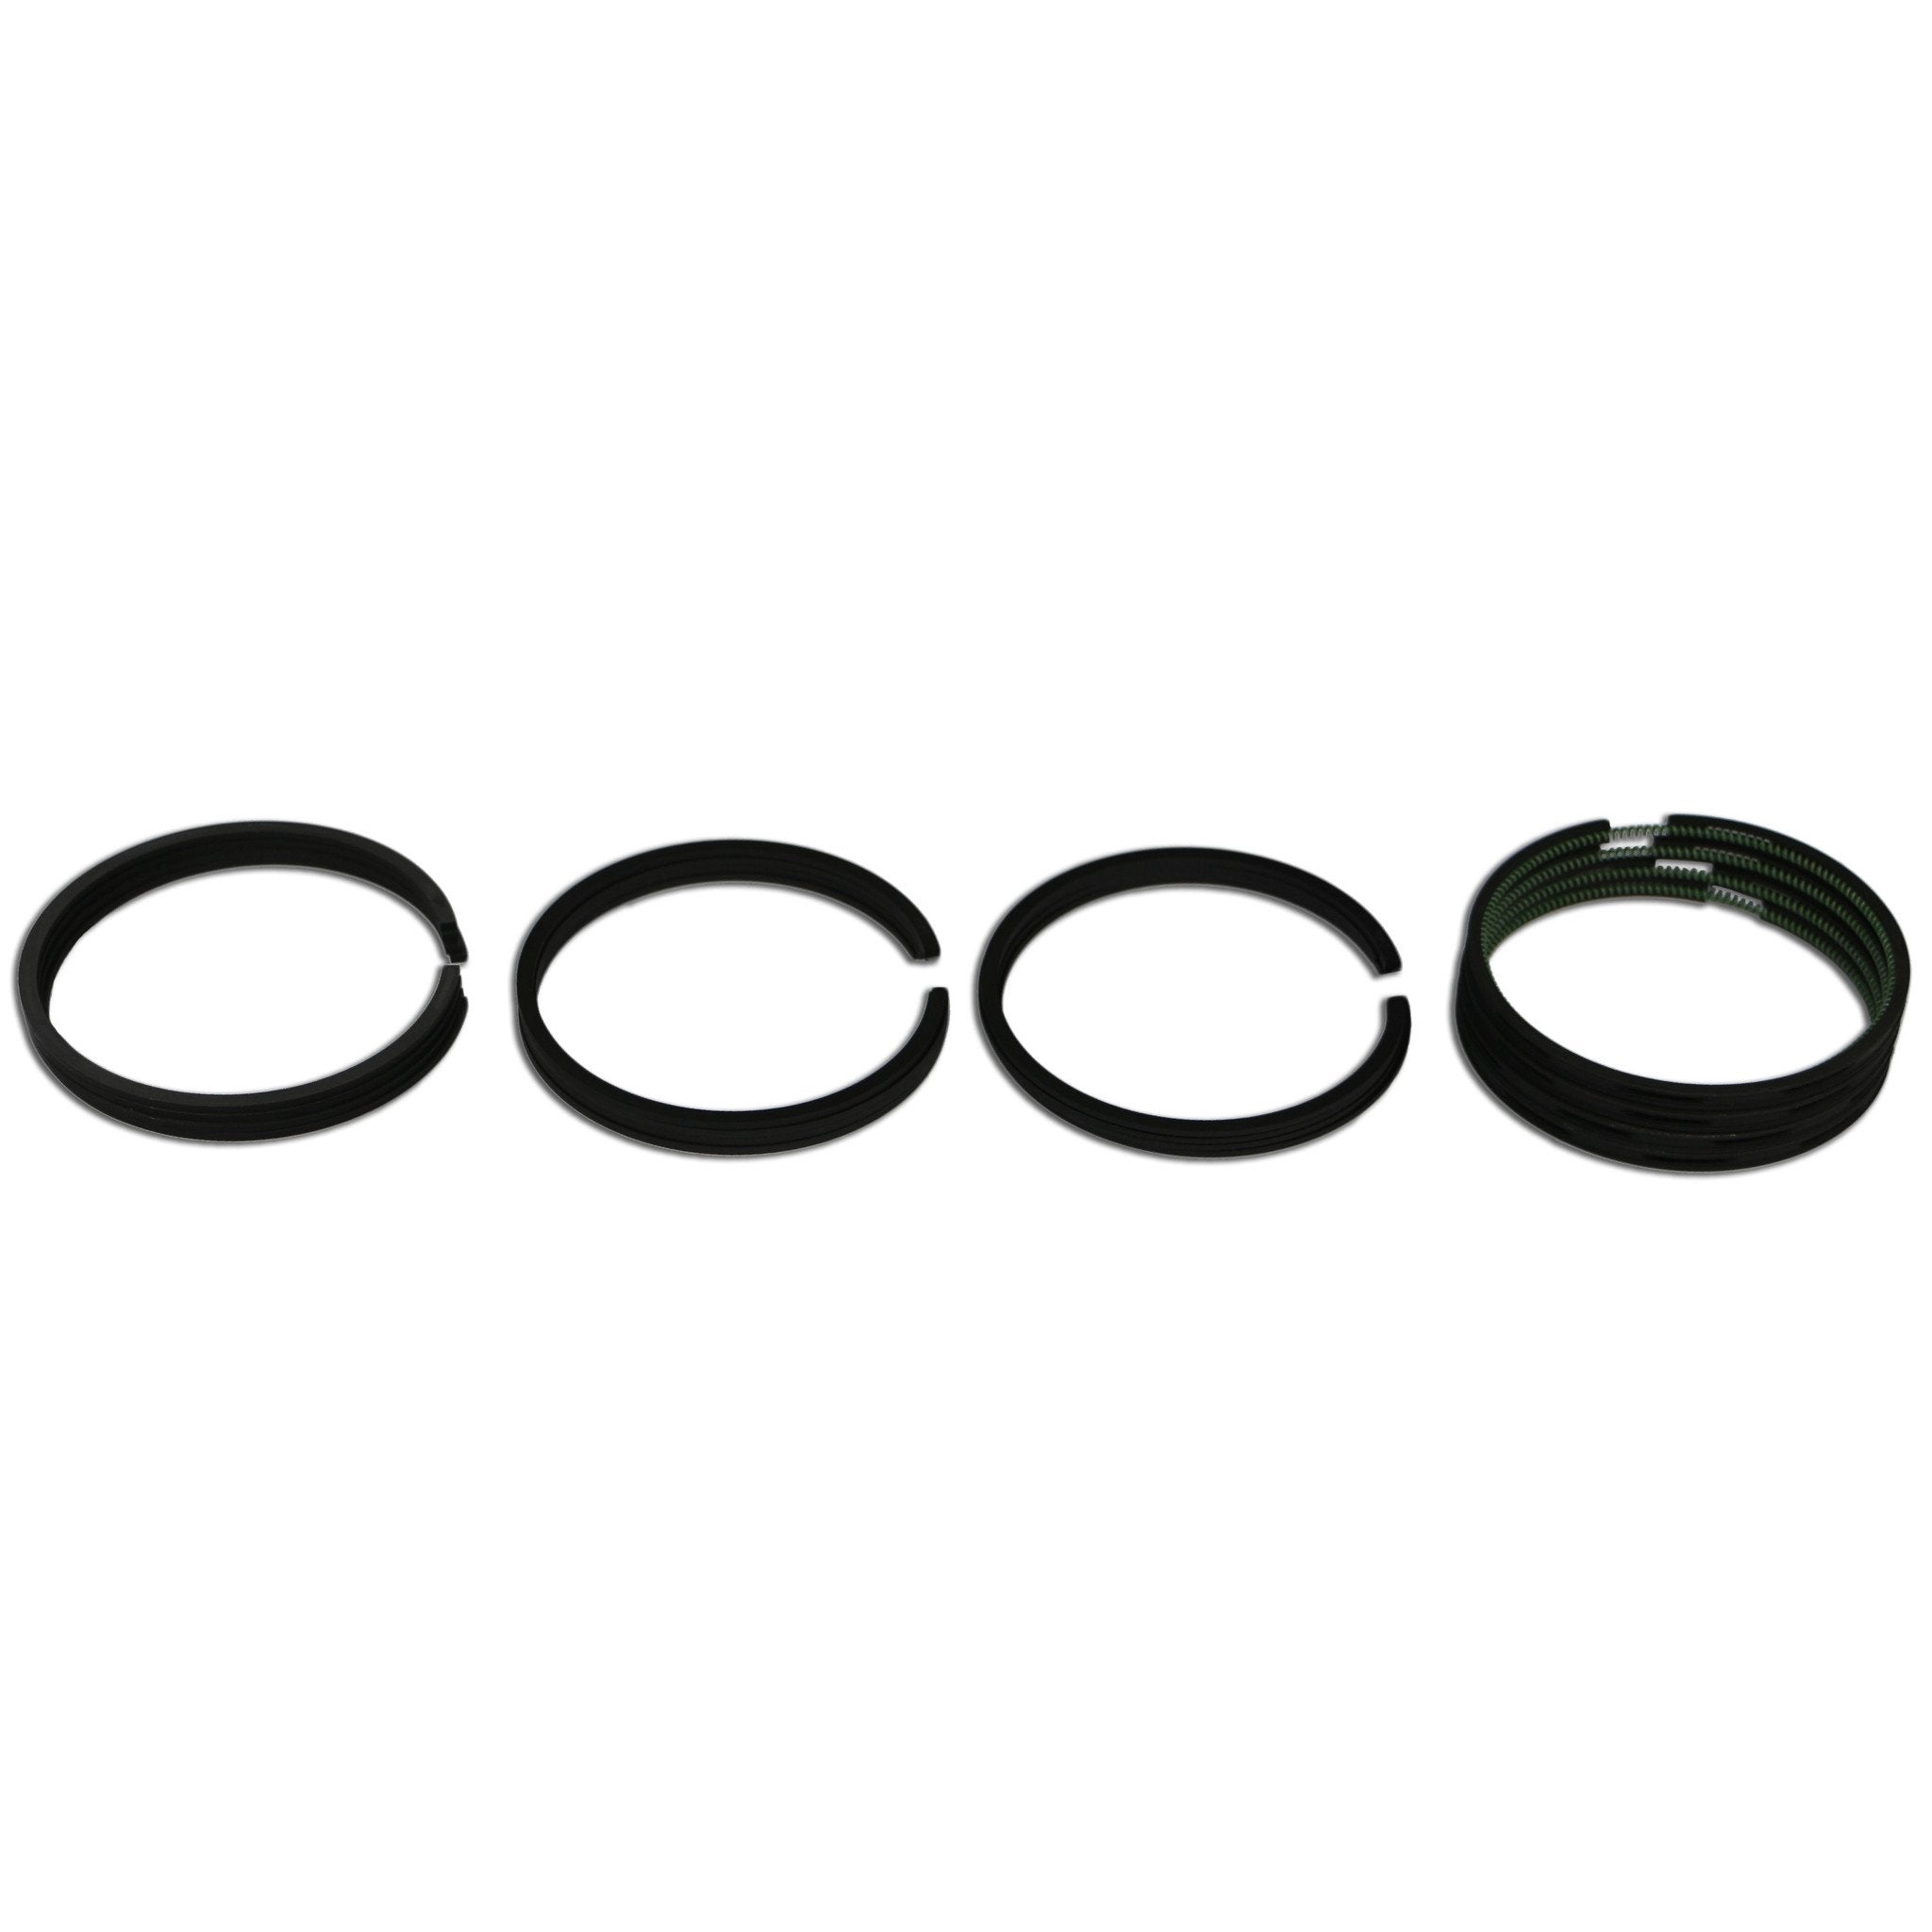 Amazon.com: Anfrere 2400pcs Universal Rubber O Ring Assortment Kit in 48  Sizes, Industrial Grade O-Ring Seal SAE and Metric NBR Orings for Plumbing,  Gas, Automotive and Faucet Repair, Resist Oil and Heat :